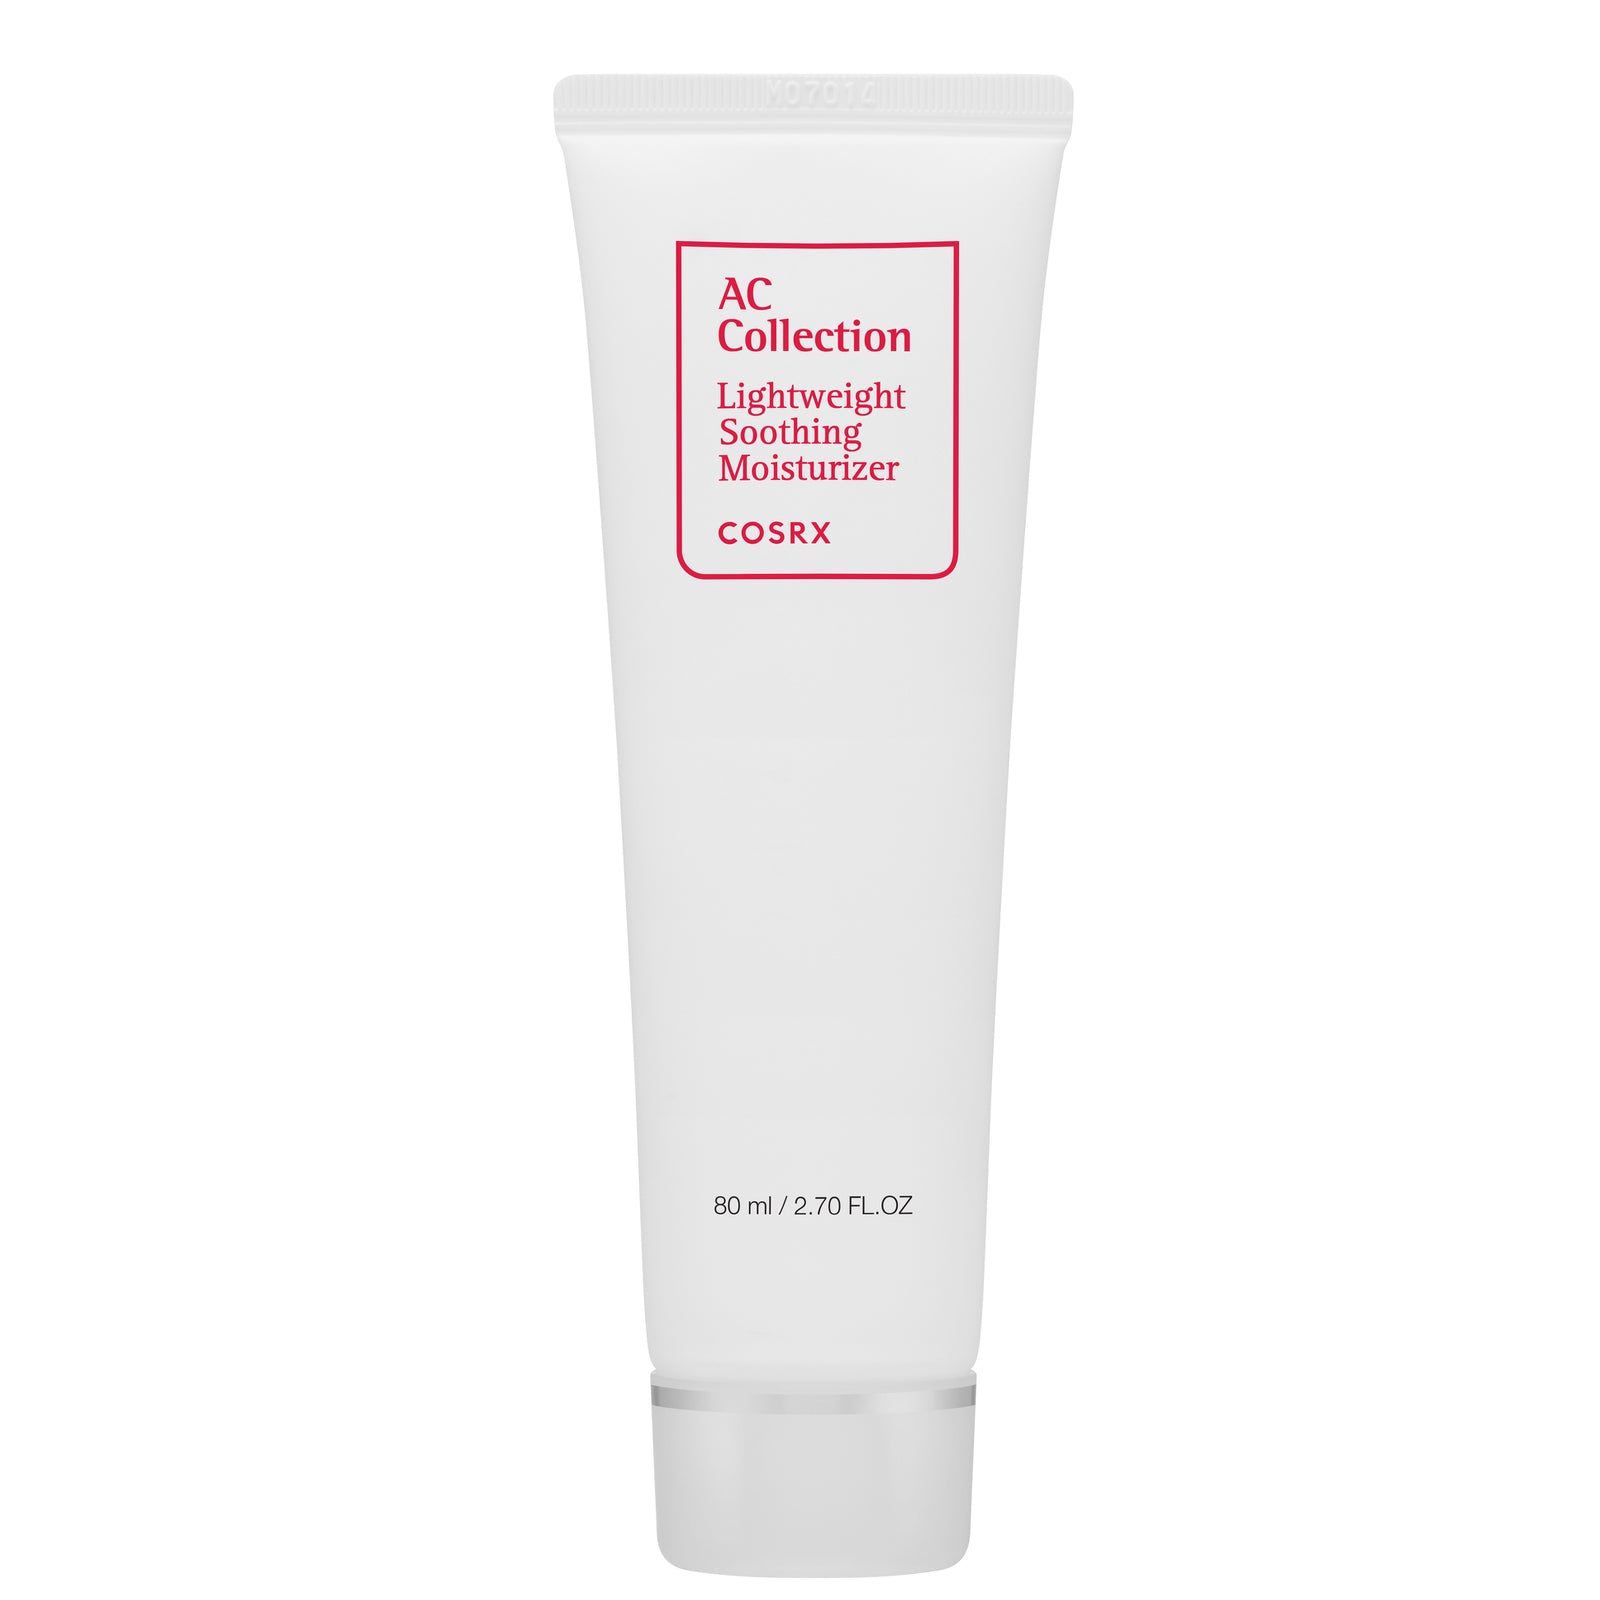 COSRX Ac Collection Lightweight Soothing Moisturizer 80ml